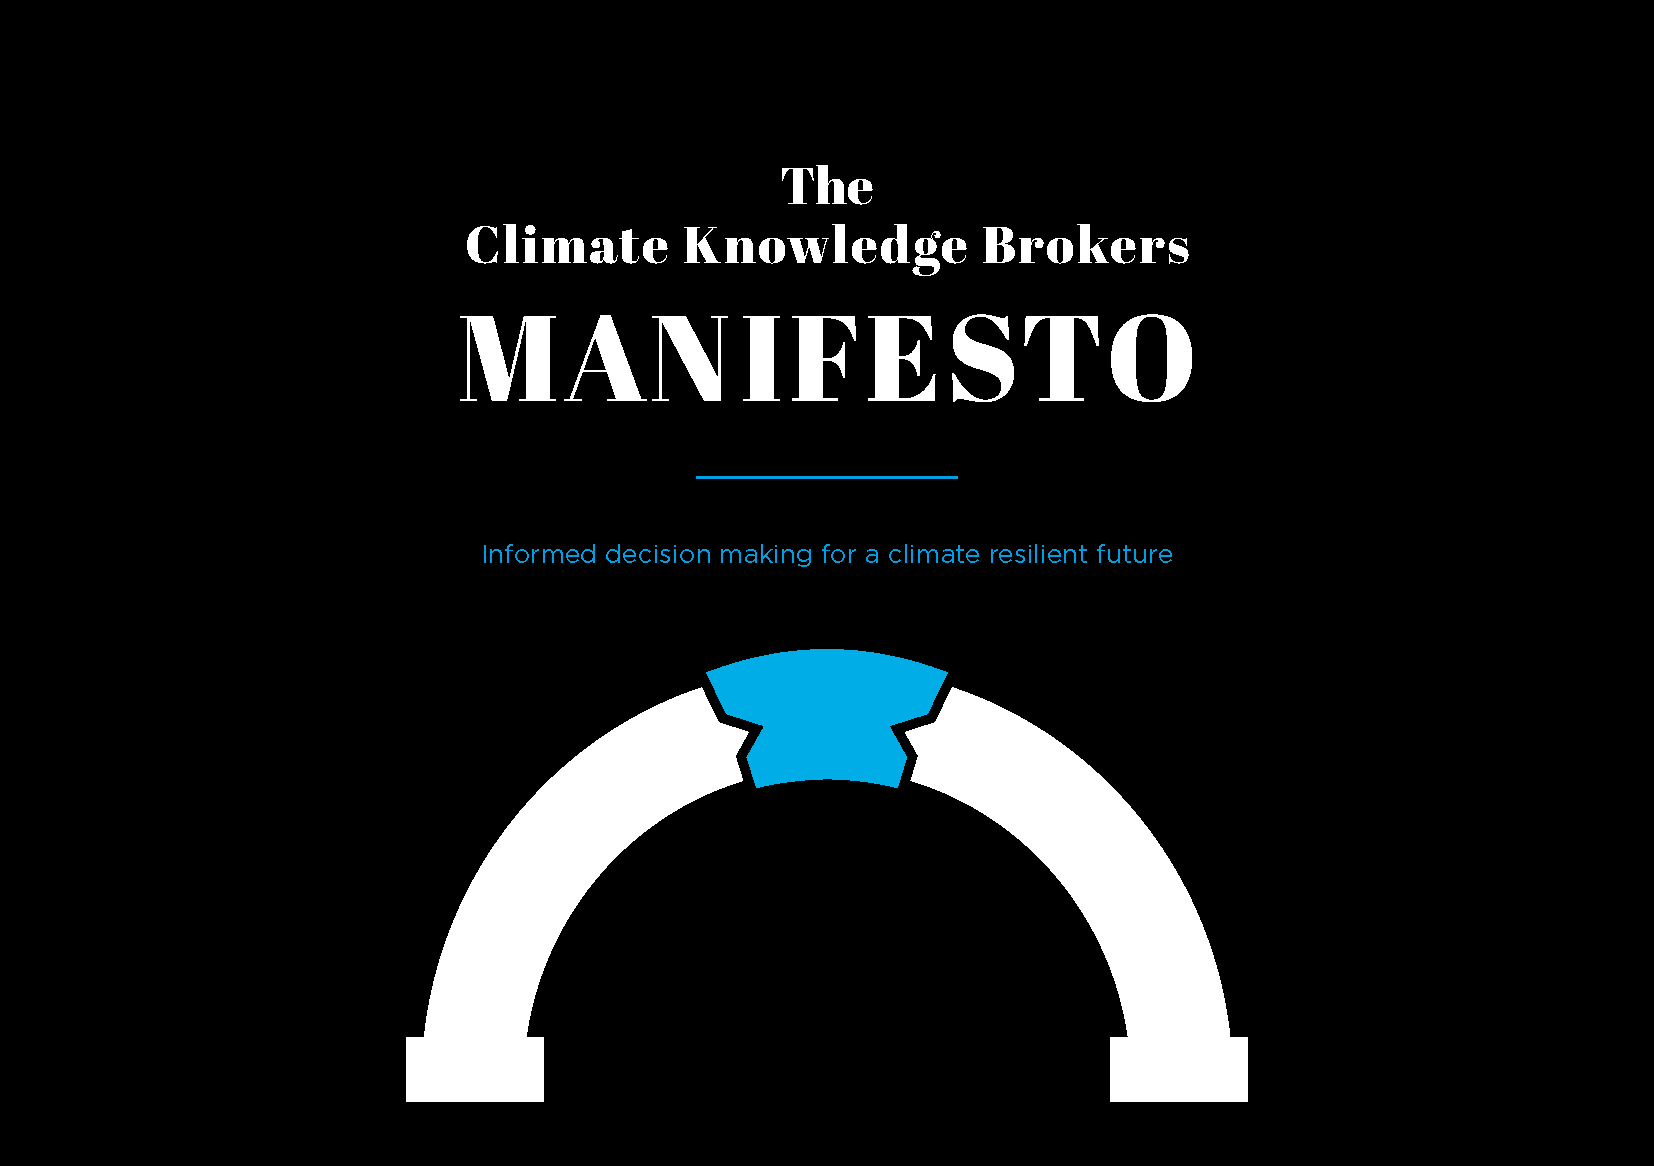 The Climate Knowledge Brokers’ Manifesto